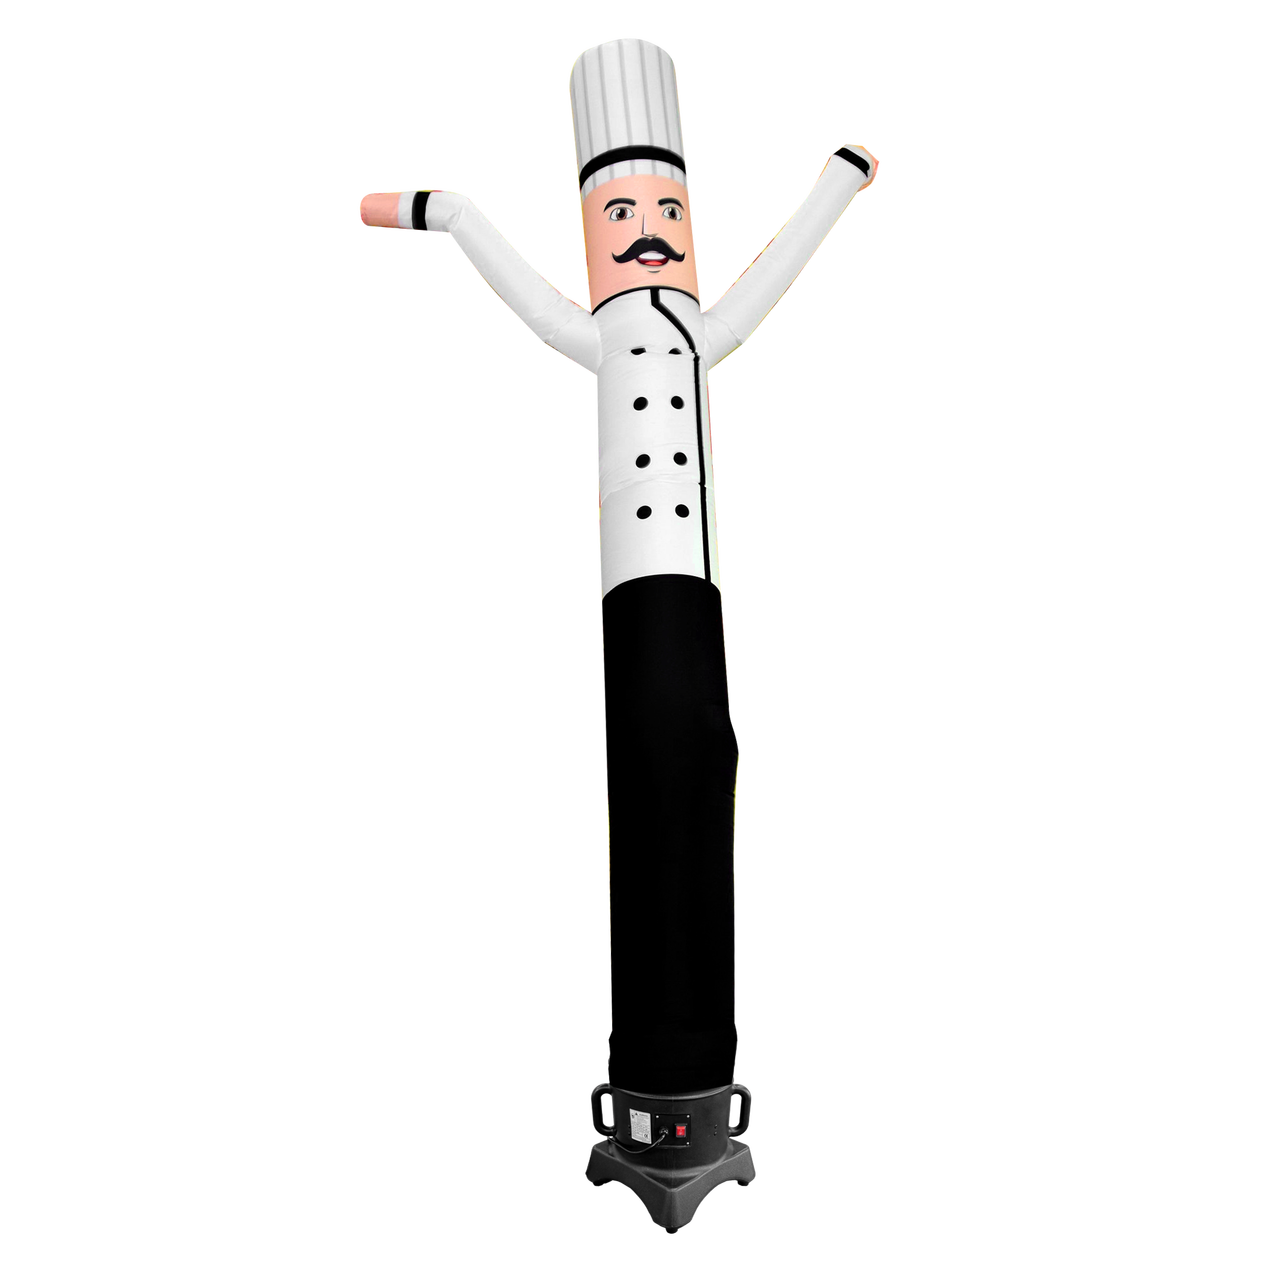 10FT CHEF AIR DANCER INFLATABLE TUBE MAN